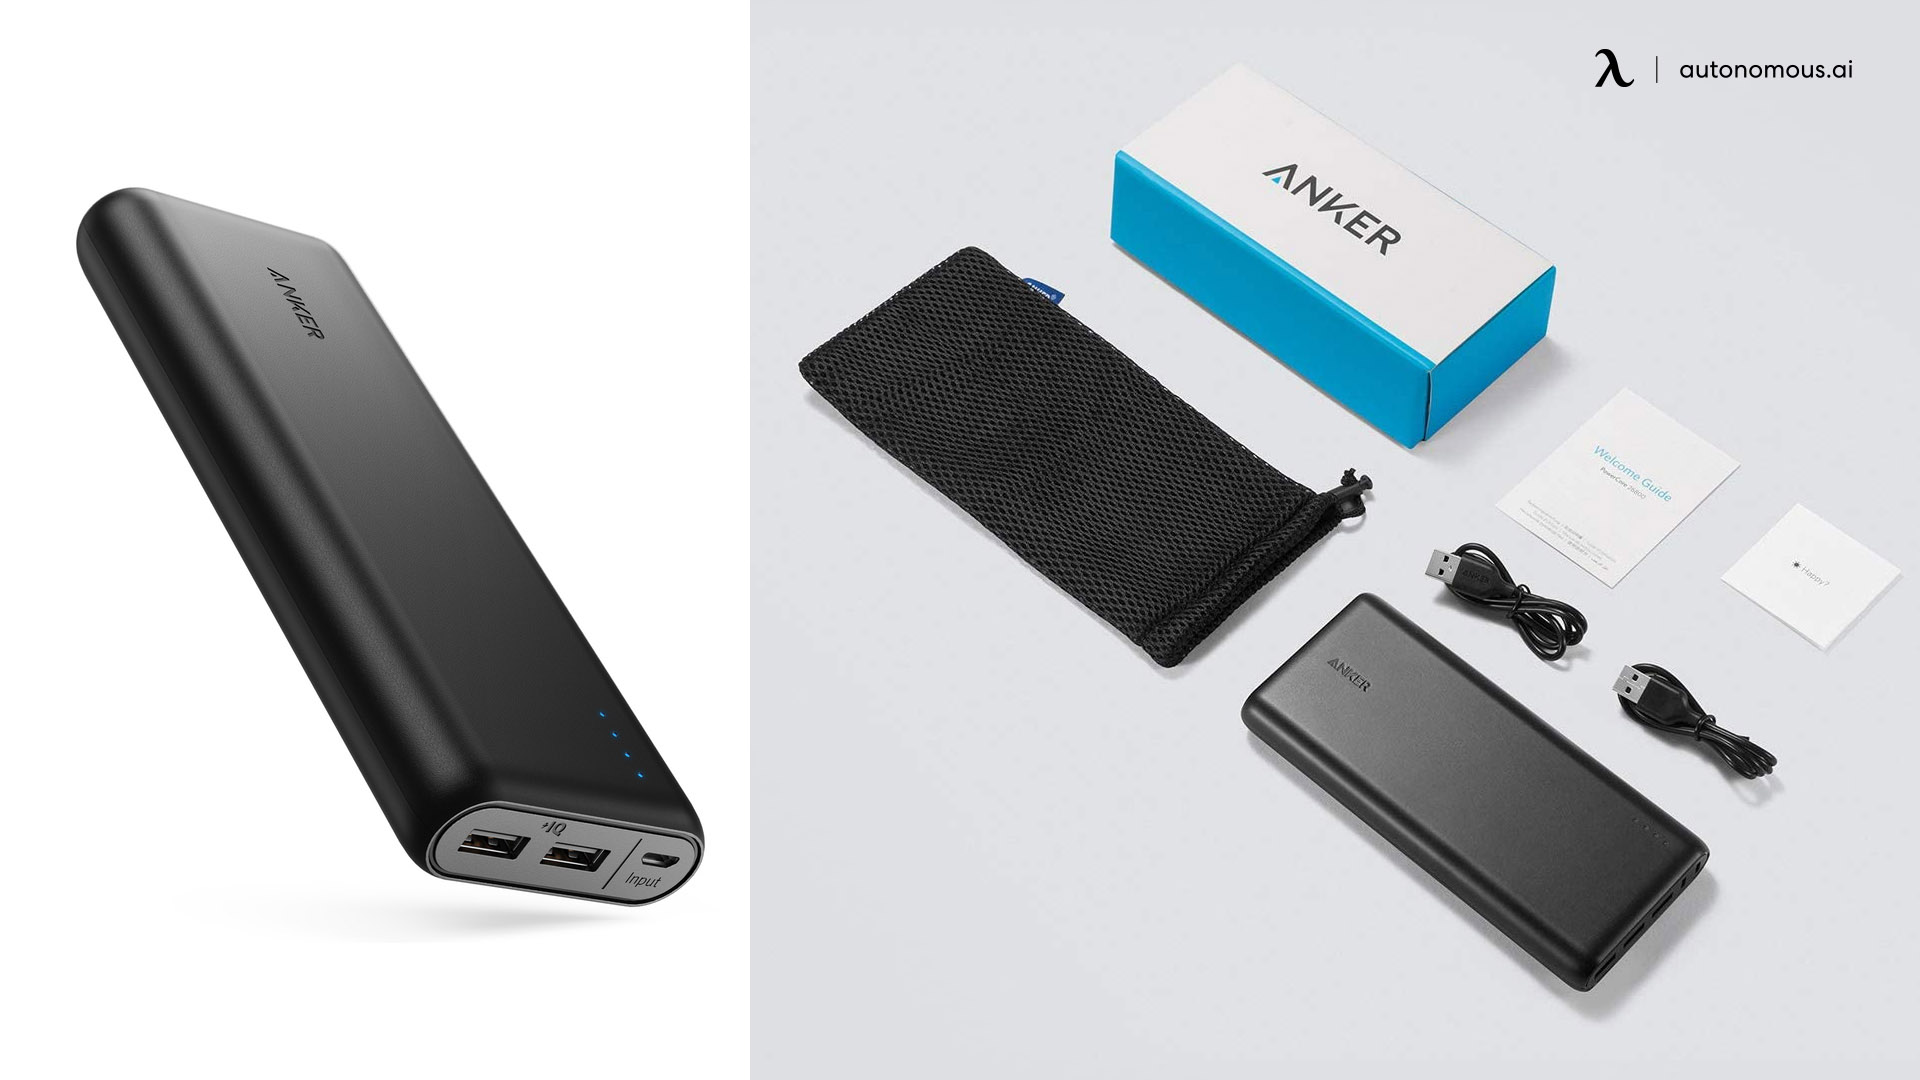 PowerCore Power Bank by Anker